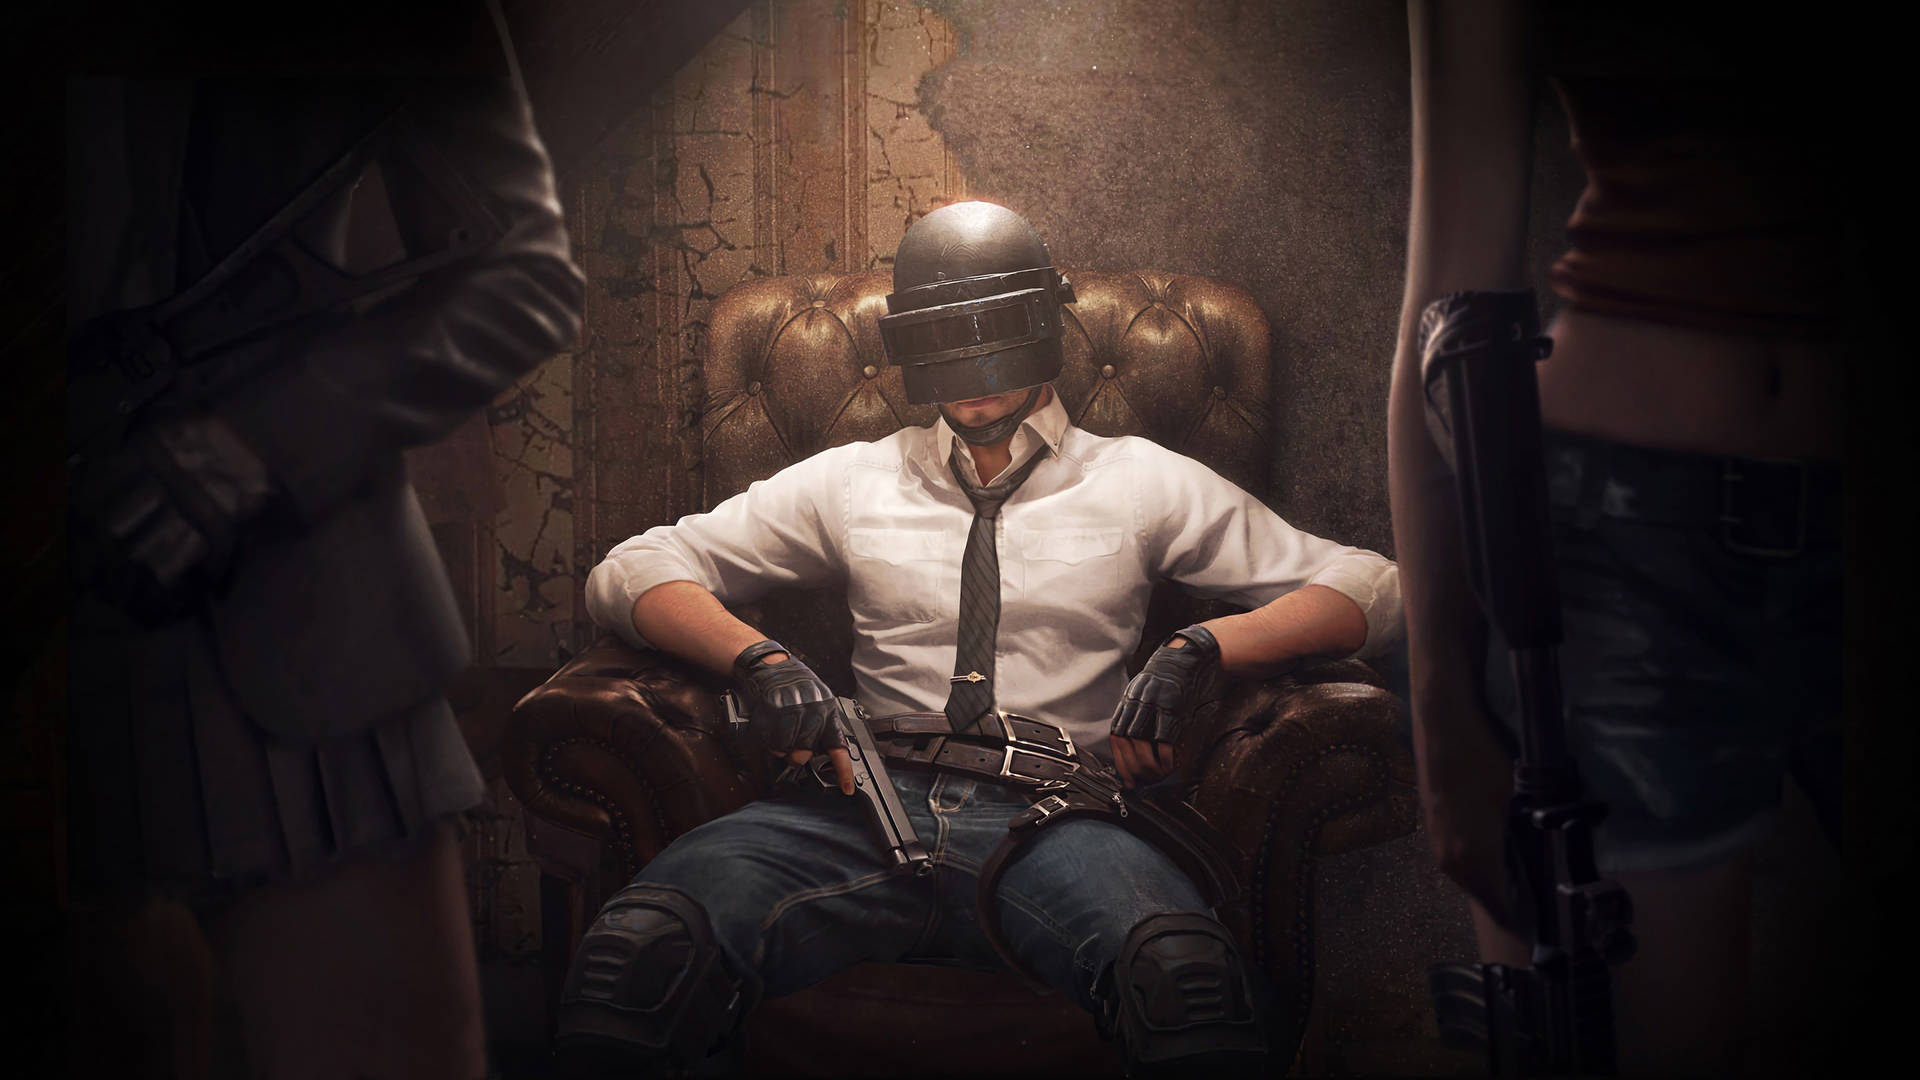 Pubg Hd Helmet Character Sitting On Chair Background